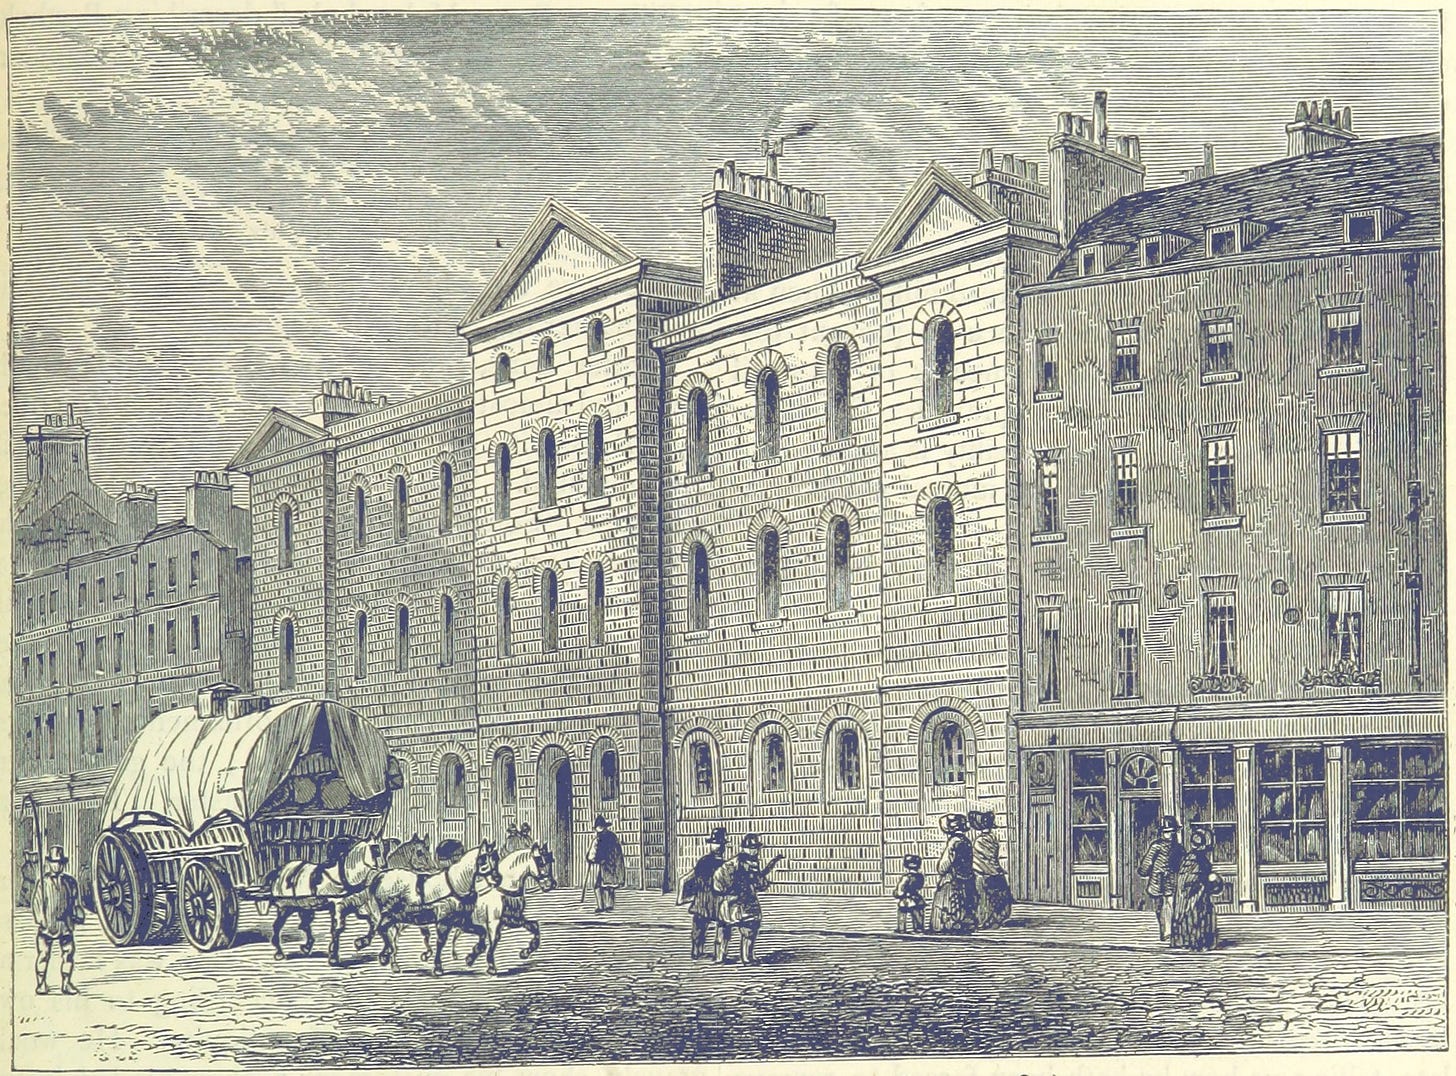 An engraving of an imposing brick building with numerous windows. In the street below, people in Victorian dress walk by. A covered waggon drawn by four horses is proceeding along the road.